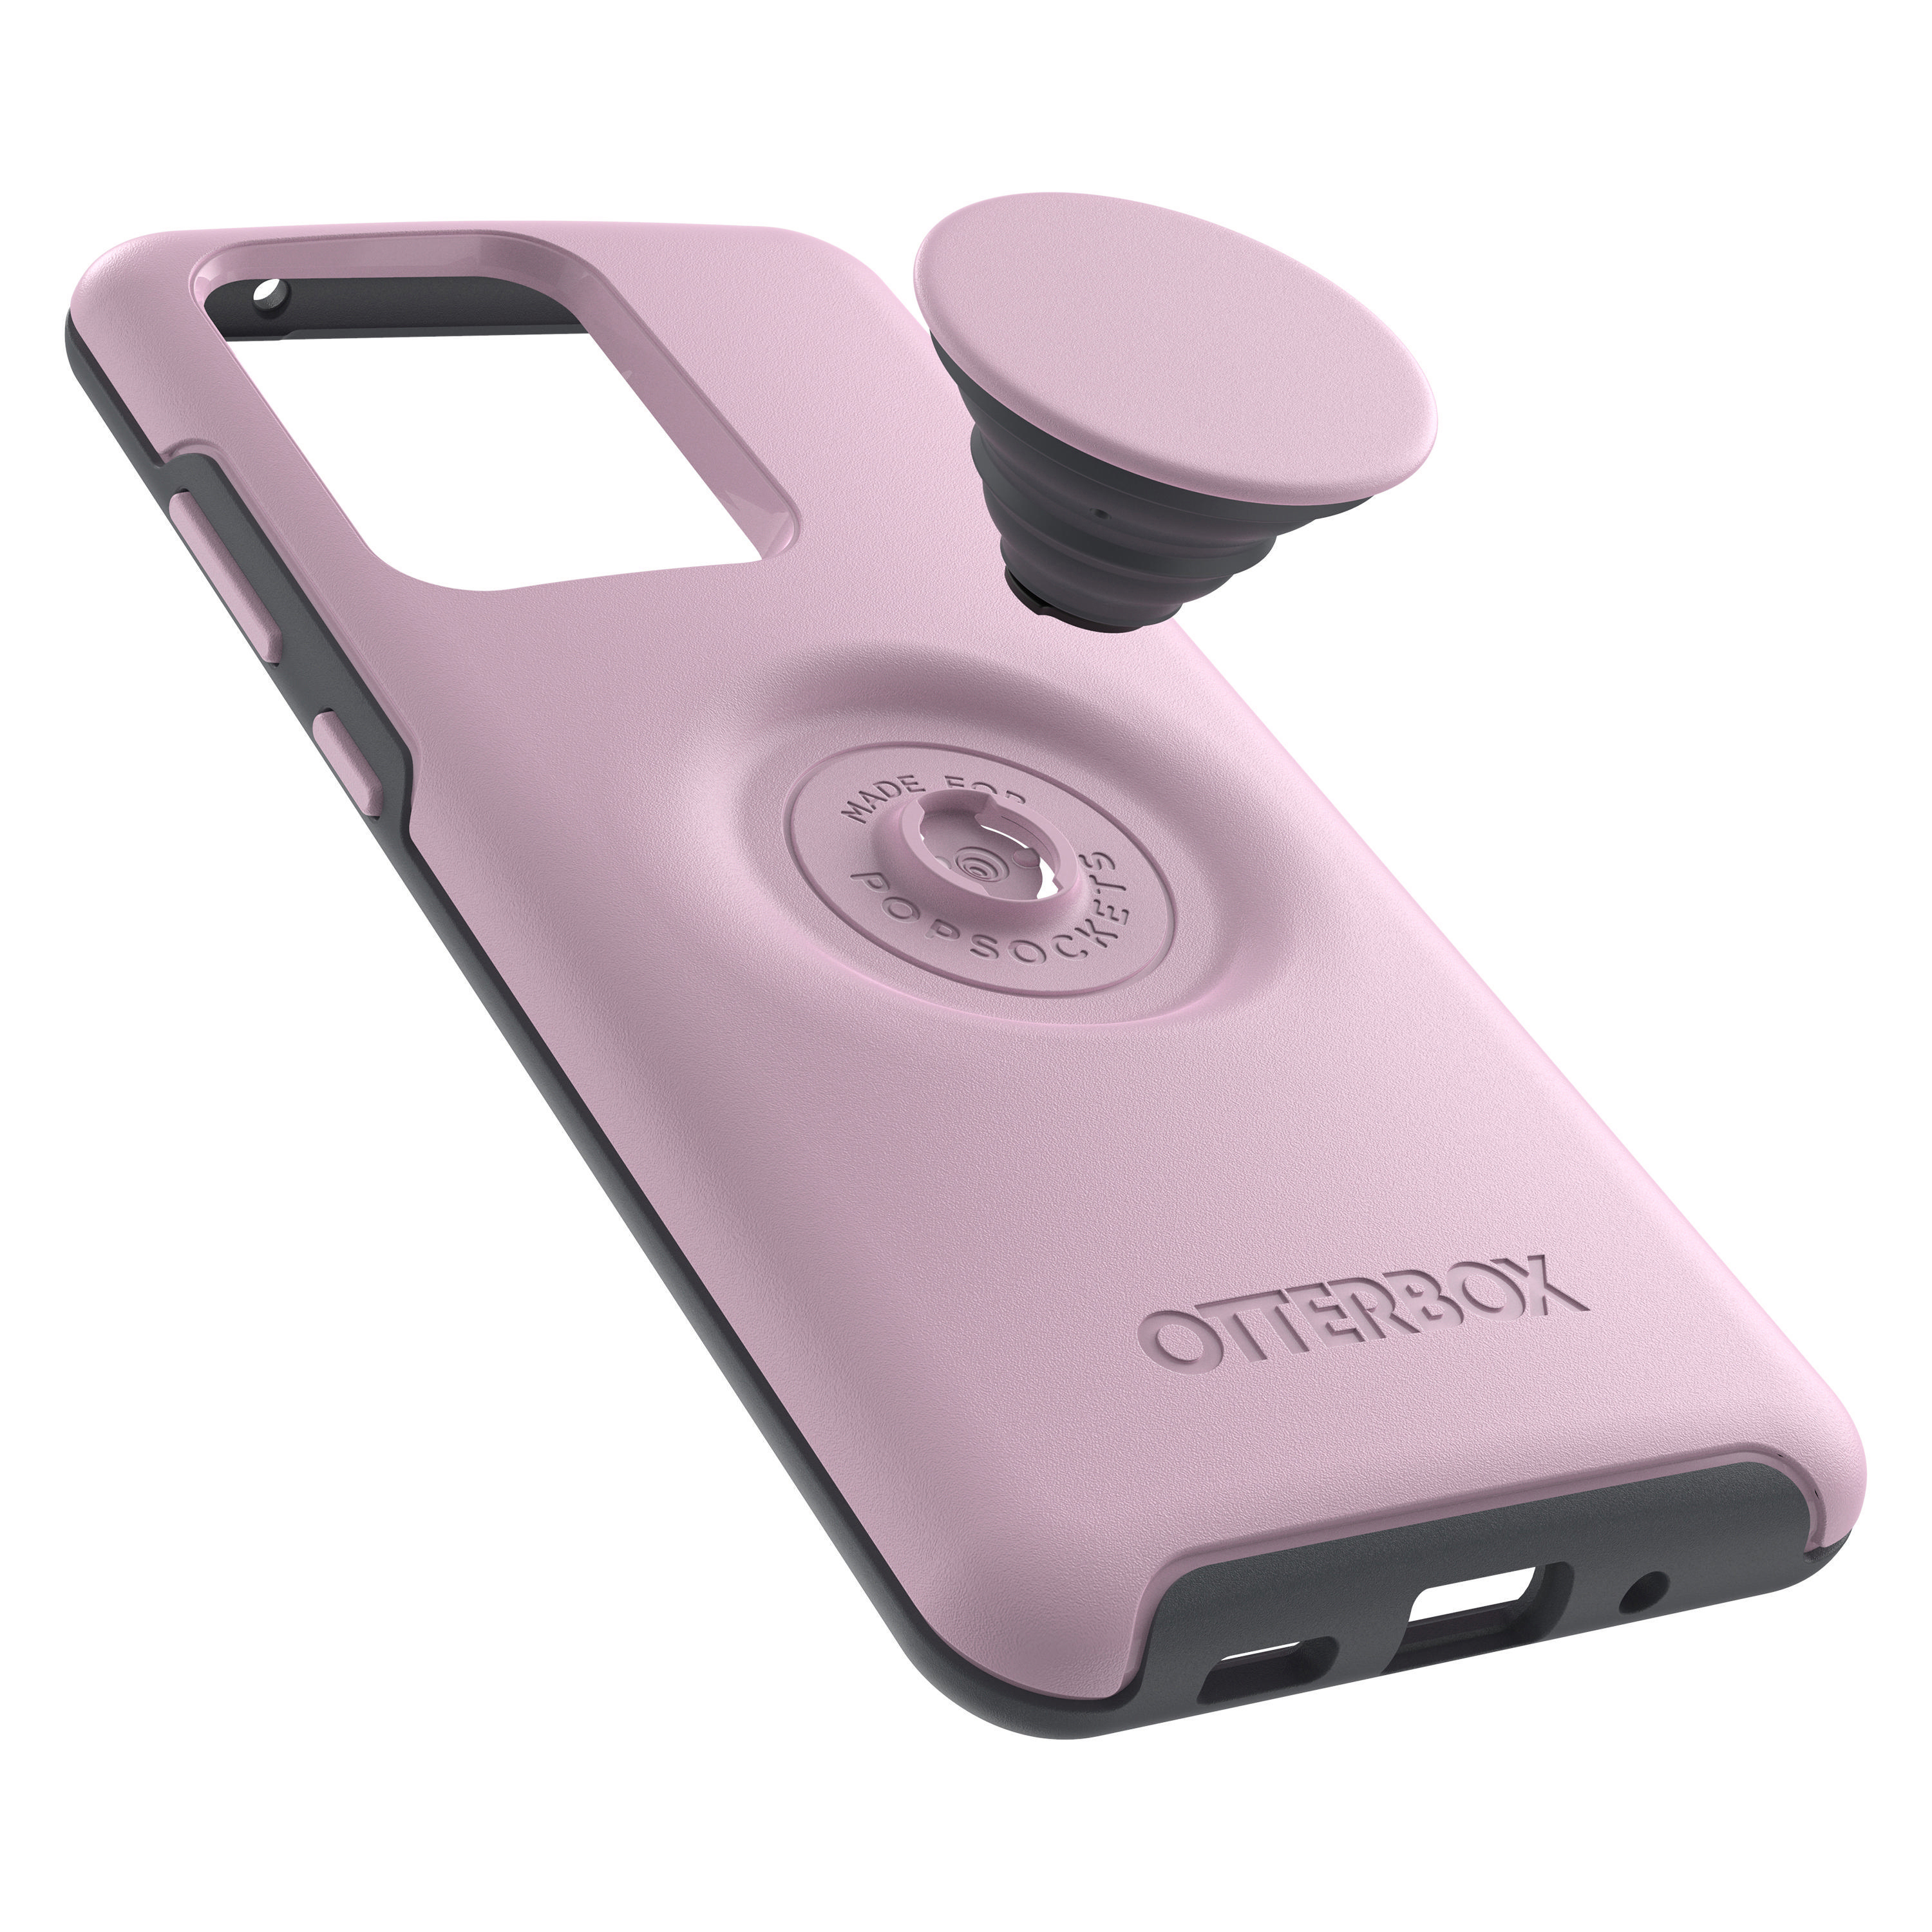 OTTERBOX 77-64239, Backcover, Ultra, Pink Samsung, Galaxy S20